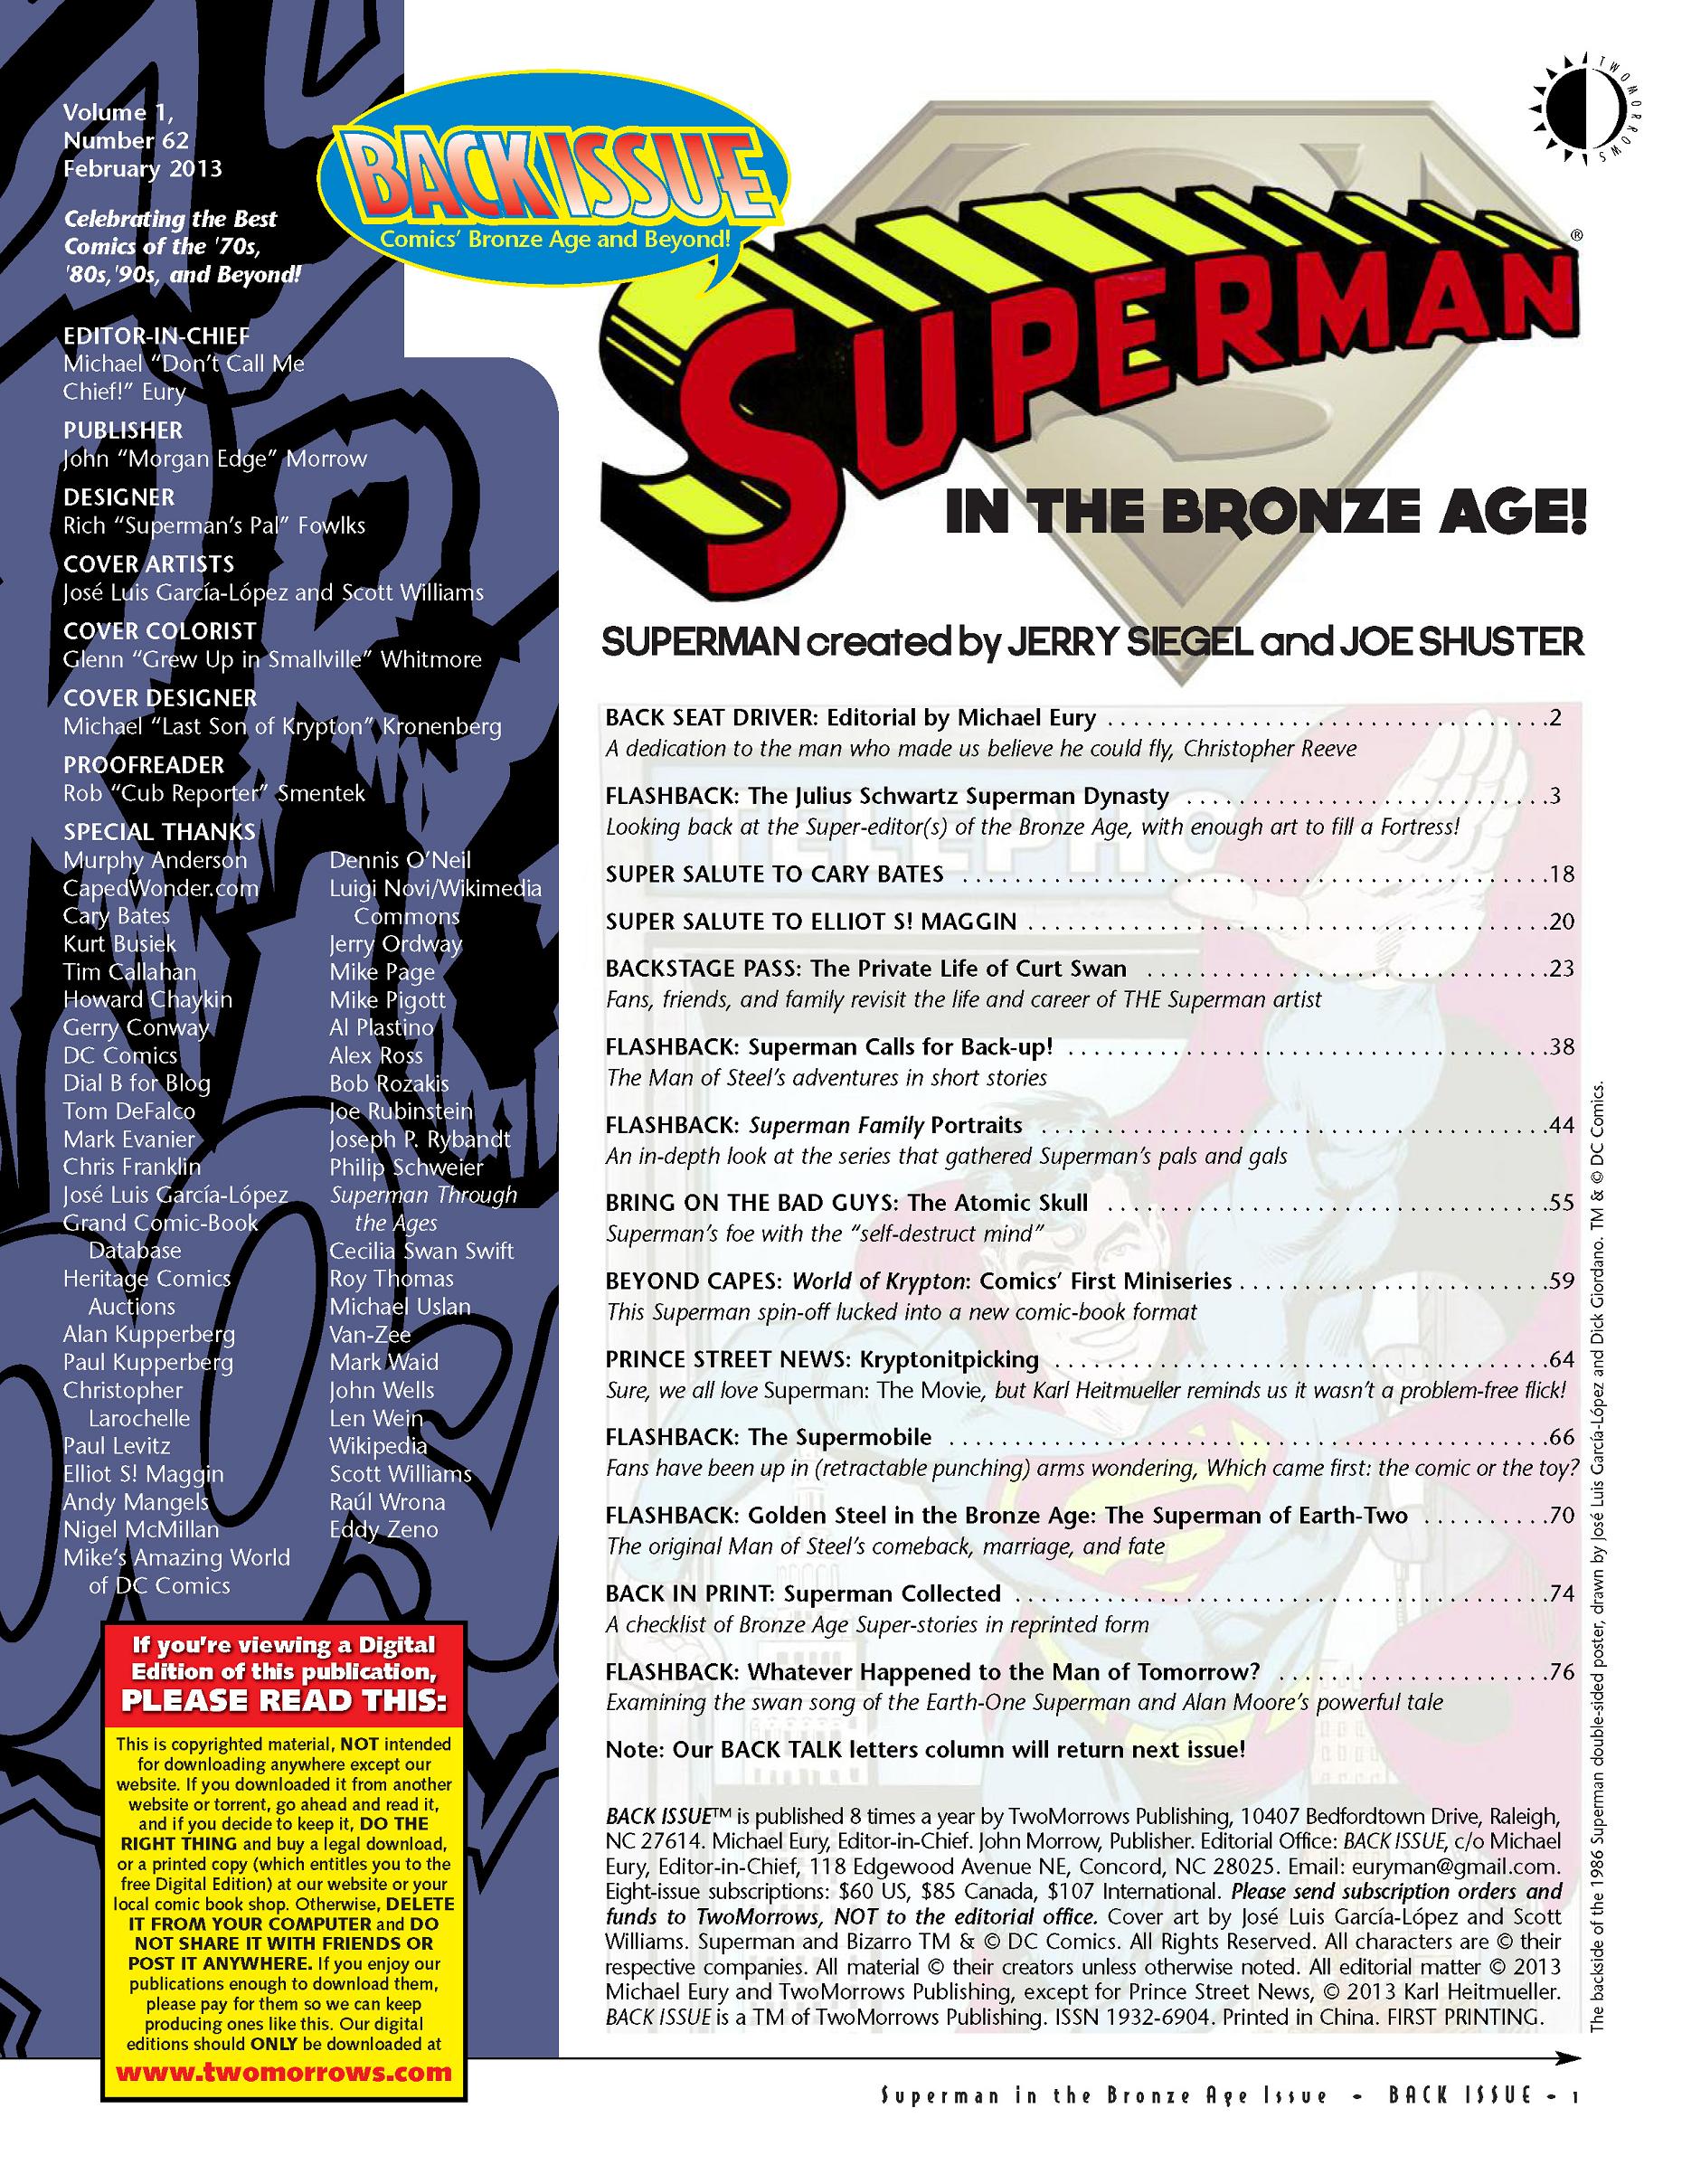 Read online Back Issue comic -  Issue #62 - 3